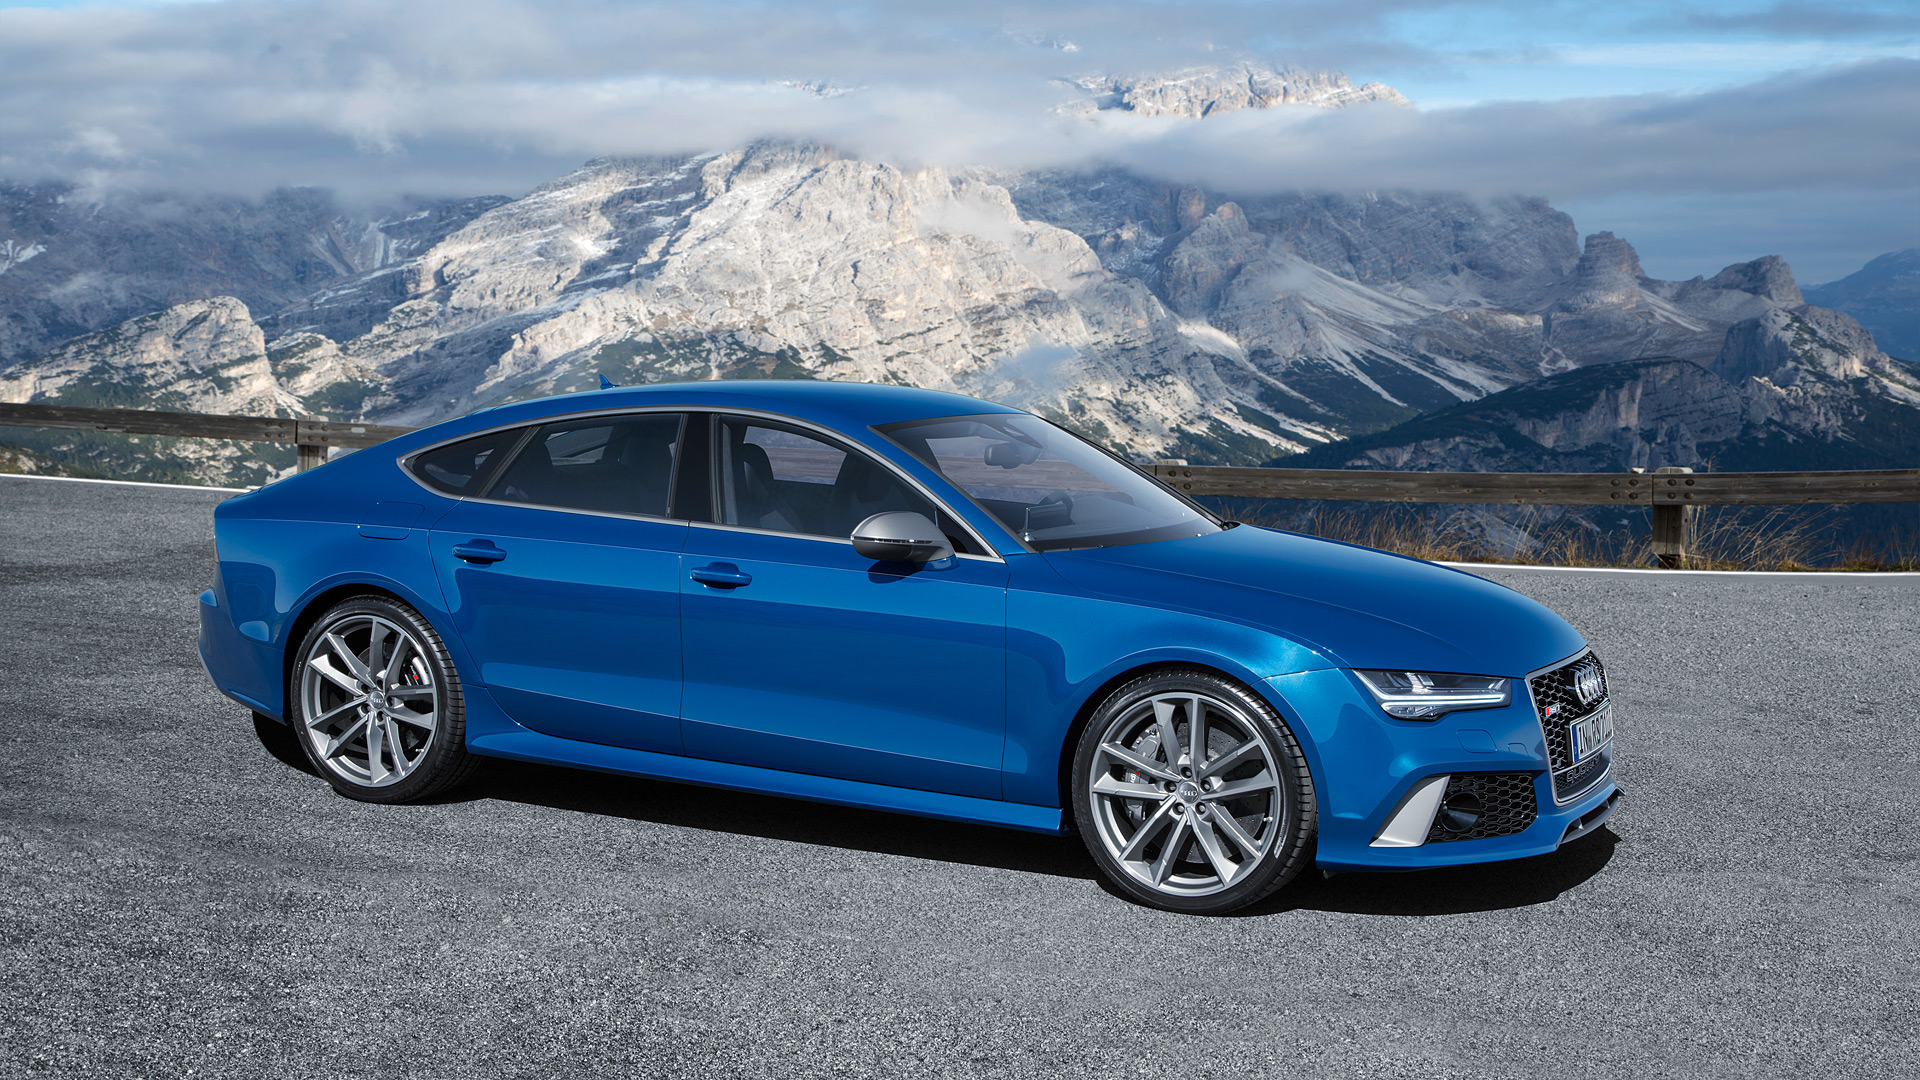 2016 Audi Rs7 Sportback Performance Picture - 2016 Audi Rs7 Blue , HD Wallpaper & Backgrounds